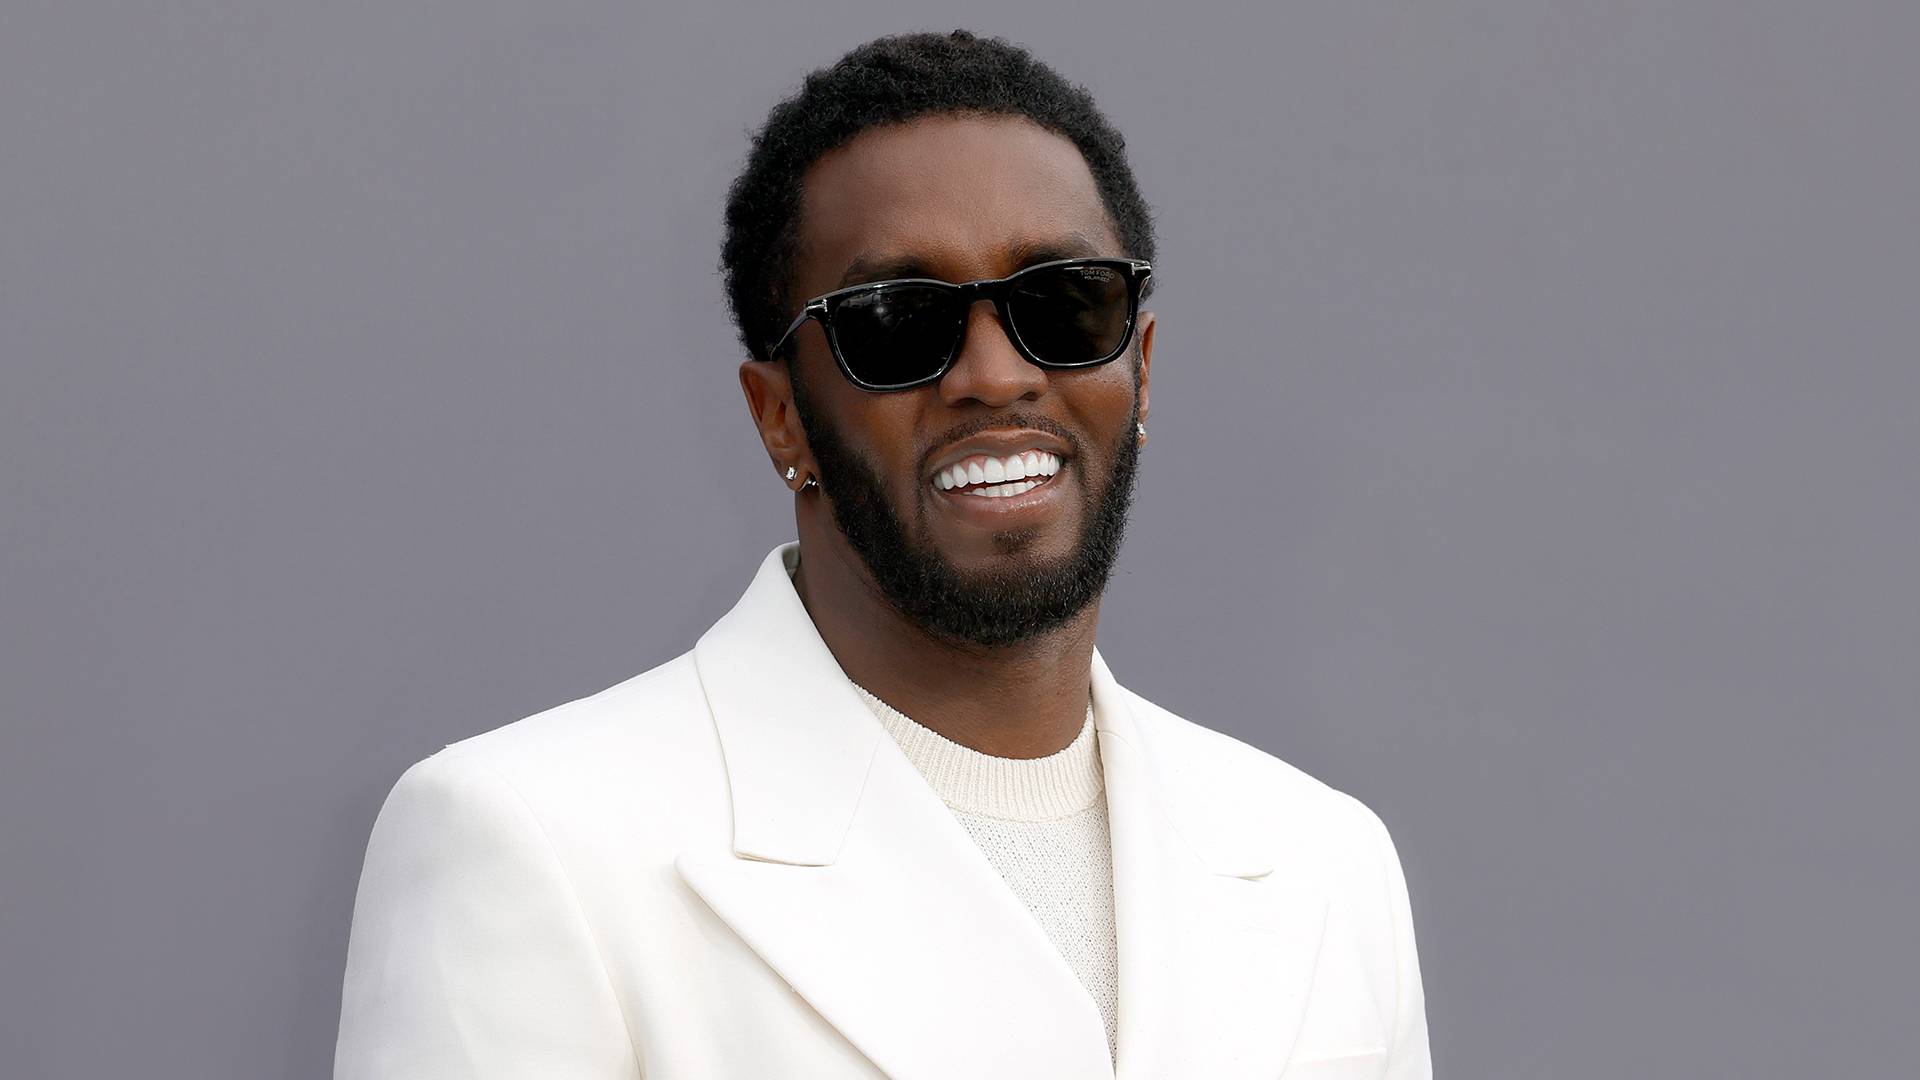 Diddy shines in an all-white suit at the 2022 Billboard Music Awards. (Photo by Frazer Harrison/Getty Images)